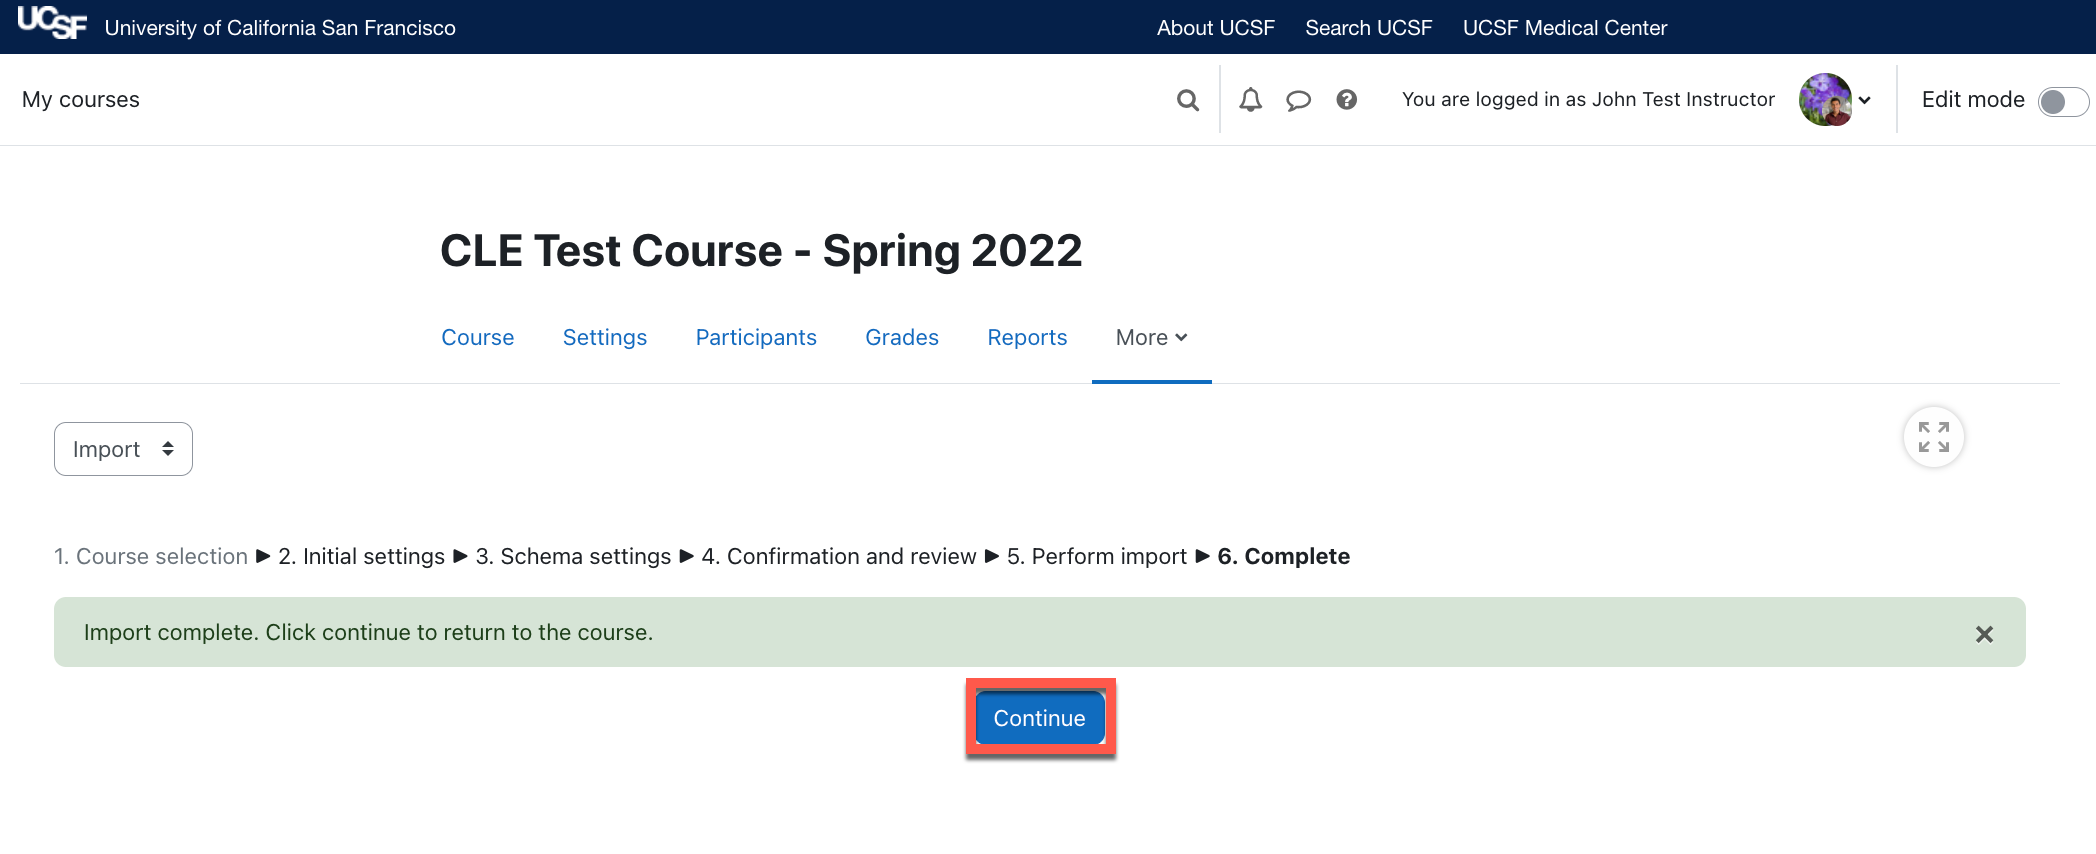 A screenshot of the CLE course from an instructor's perspective showing the import is complete page.png